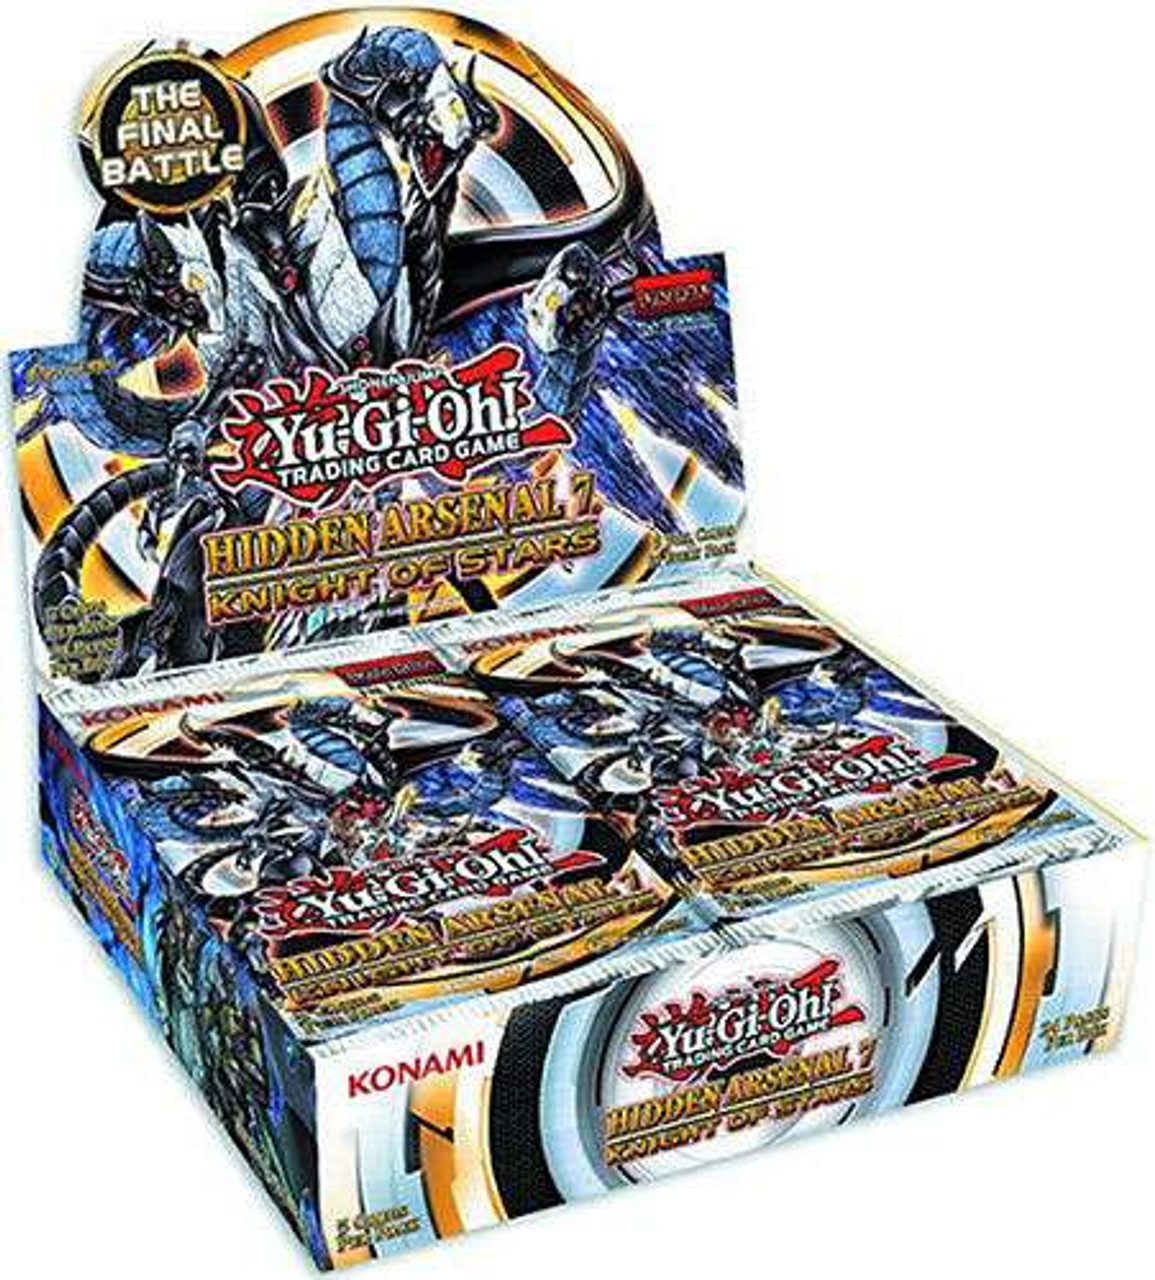 Yugioh Trading Card Game Hidden Arsenal 7 Knight Of Stars Booster Box